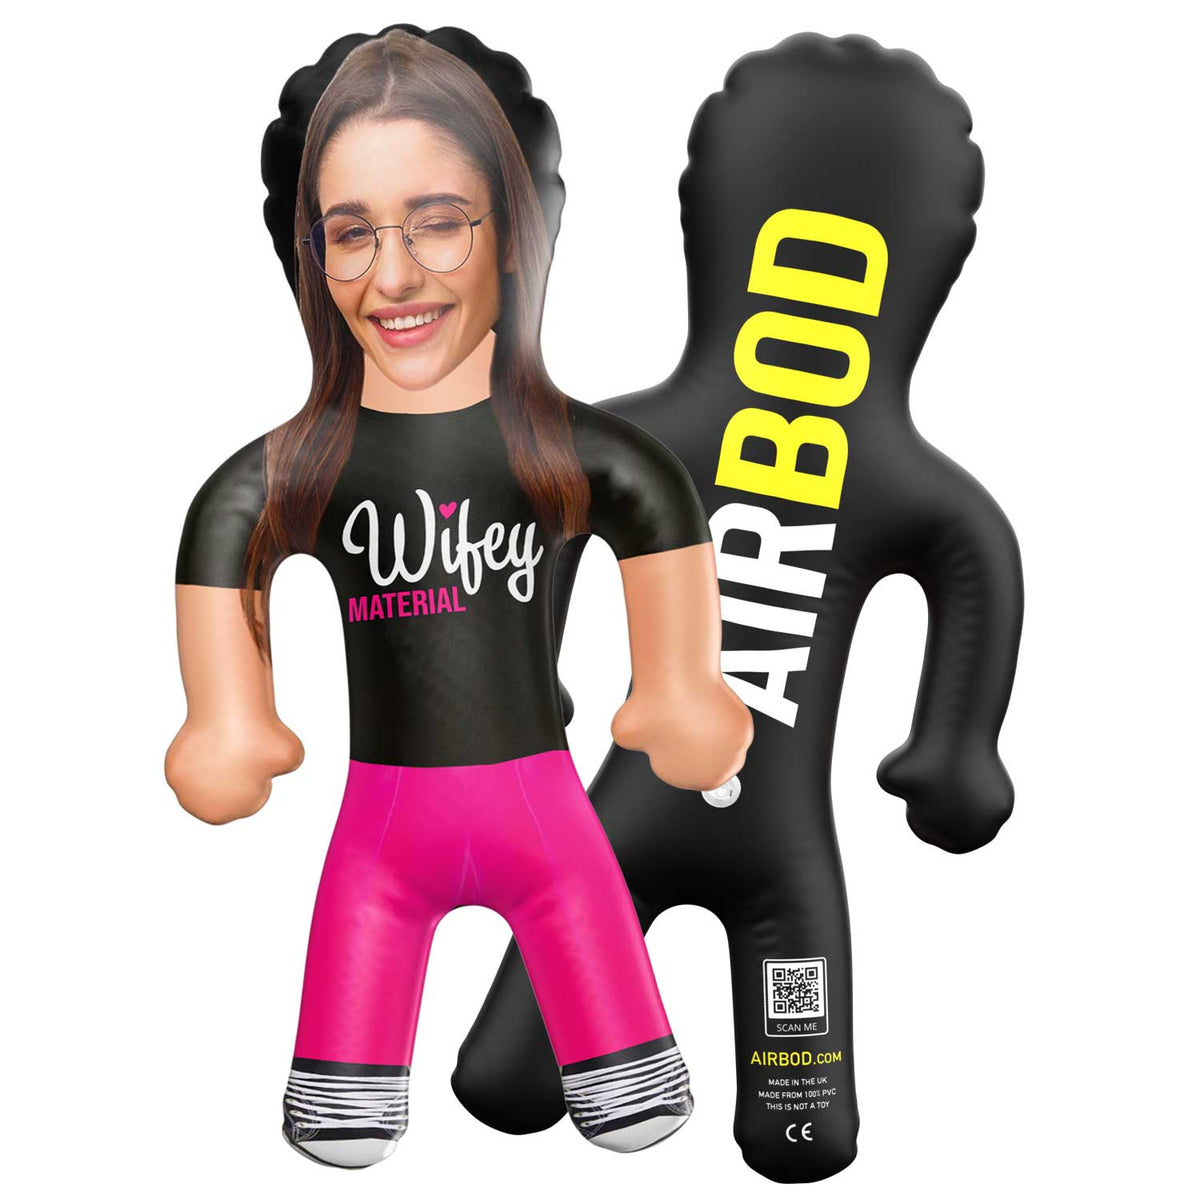 Wifey Material Inflatable Doll - Wifey Material Blow Up Doll